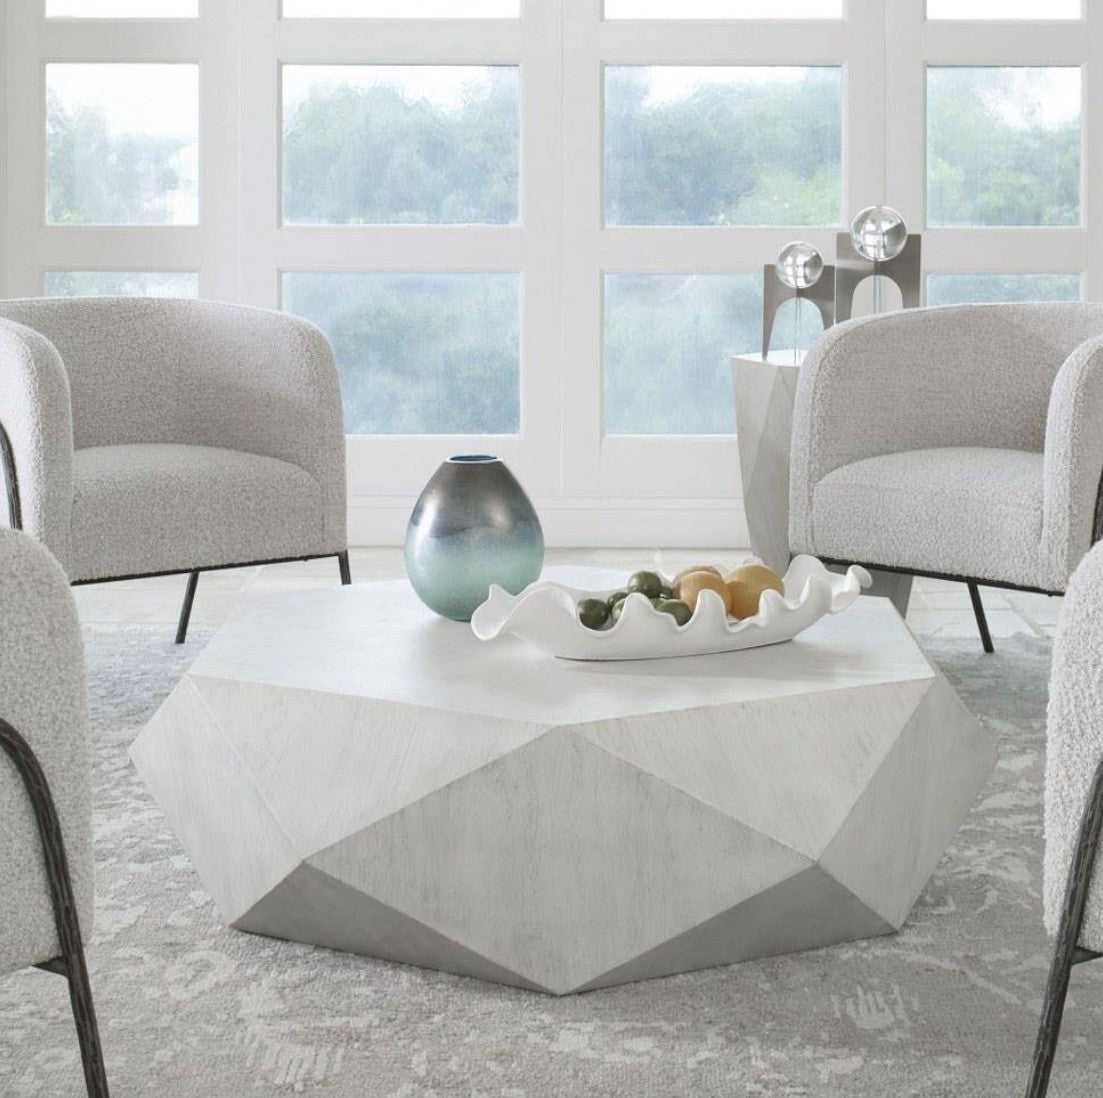 VOLKER COFFEE TABLE WHITE